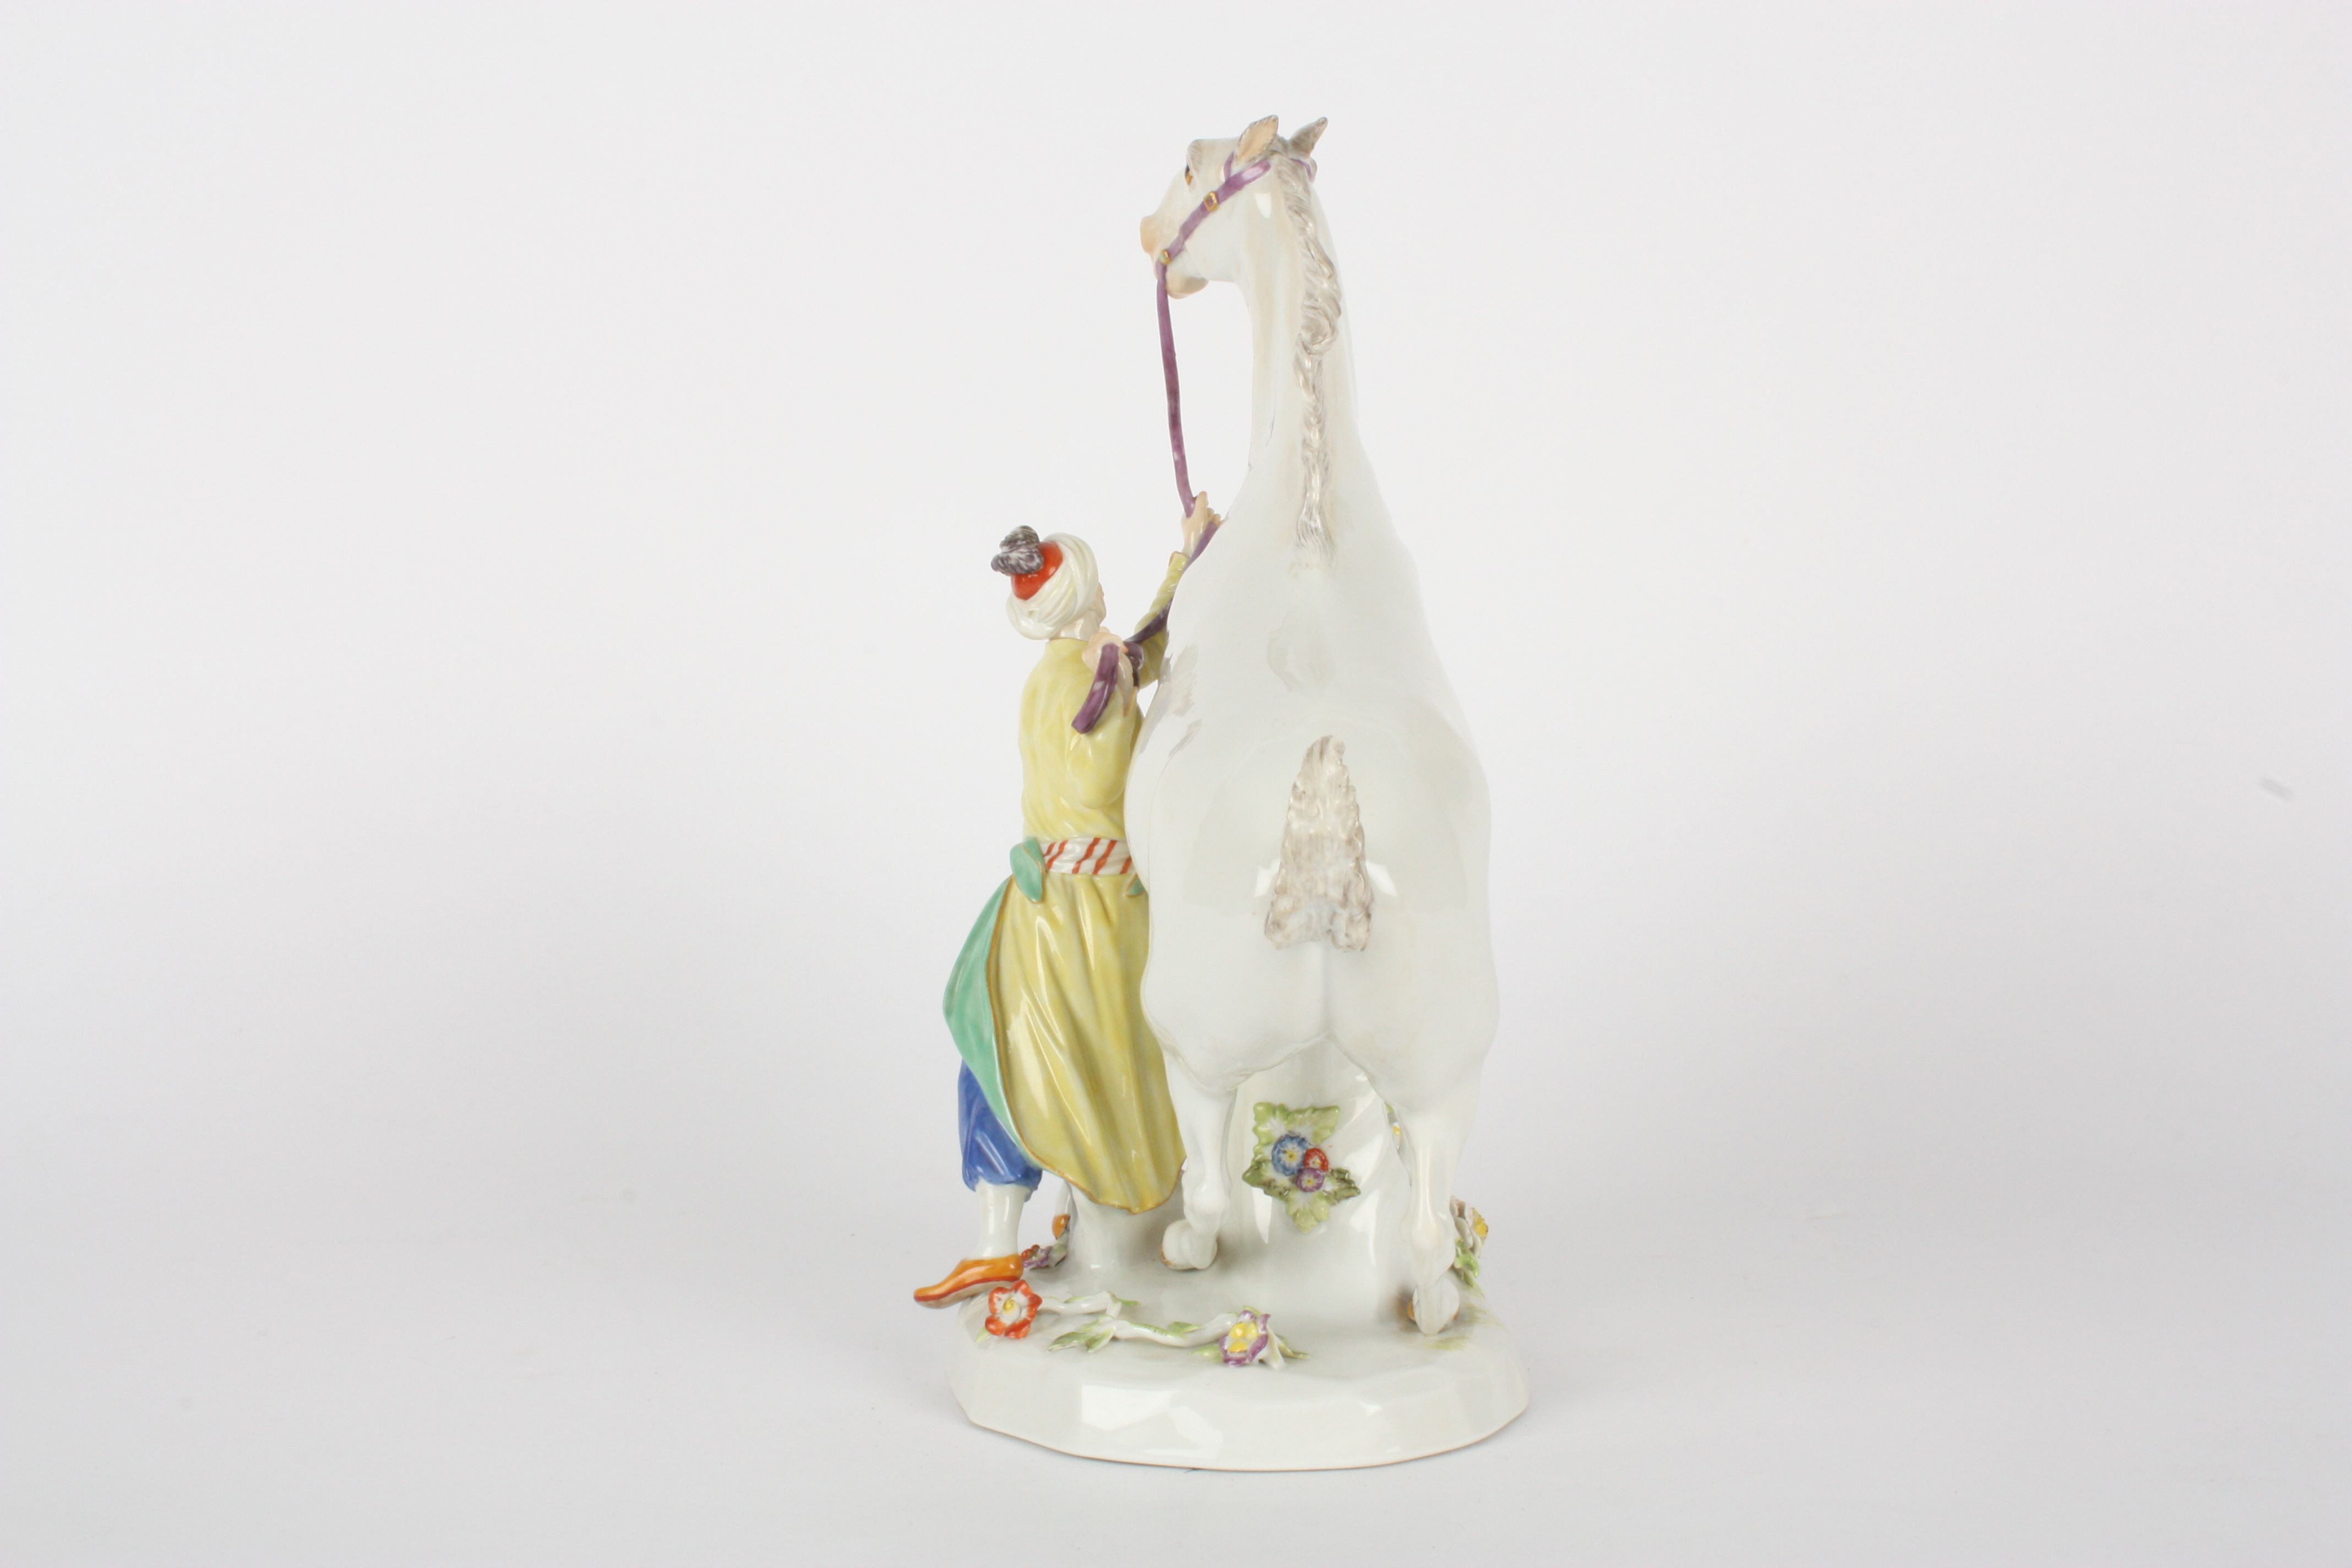 Late 20th century Meissen figure group Turk with Horse, after Kaendler, modelled standing holding - Image 2 of 4